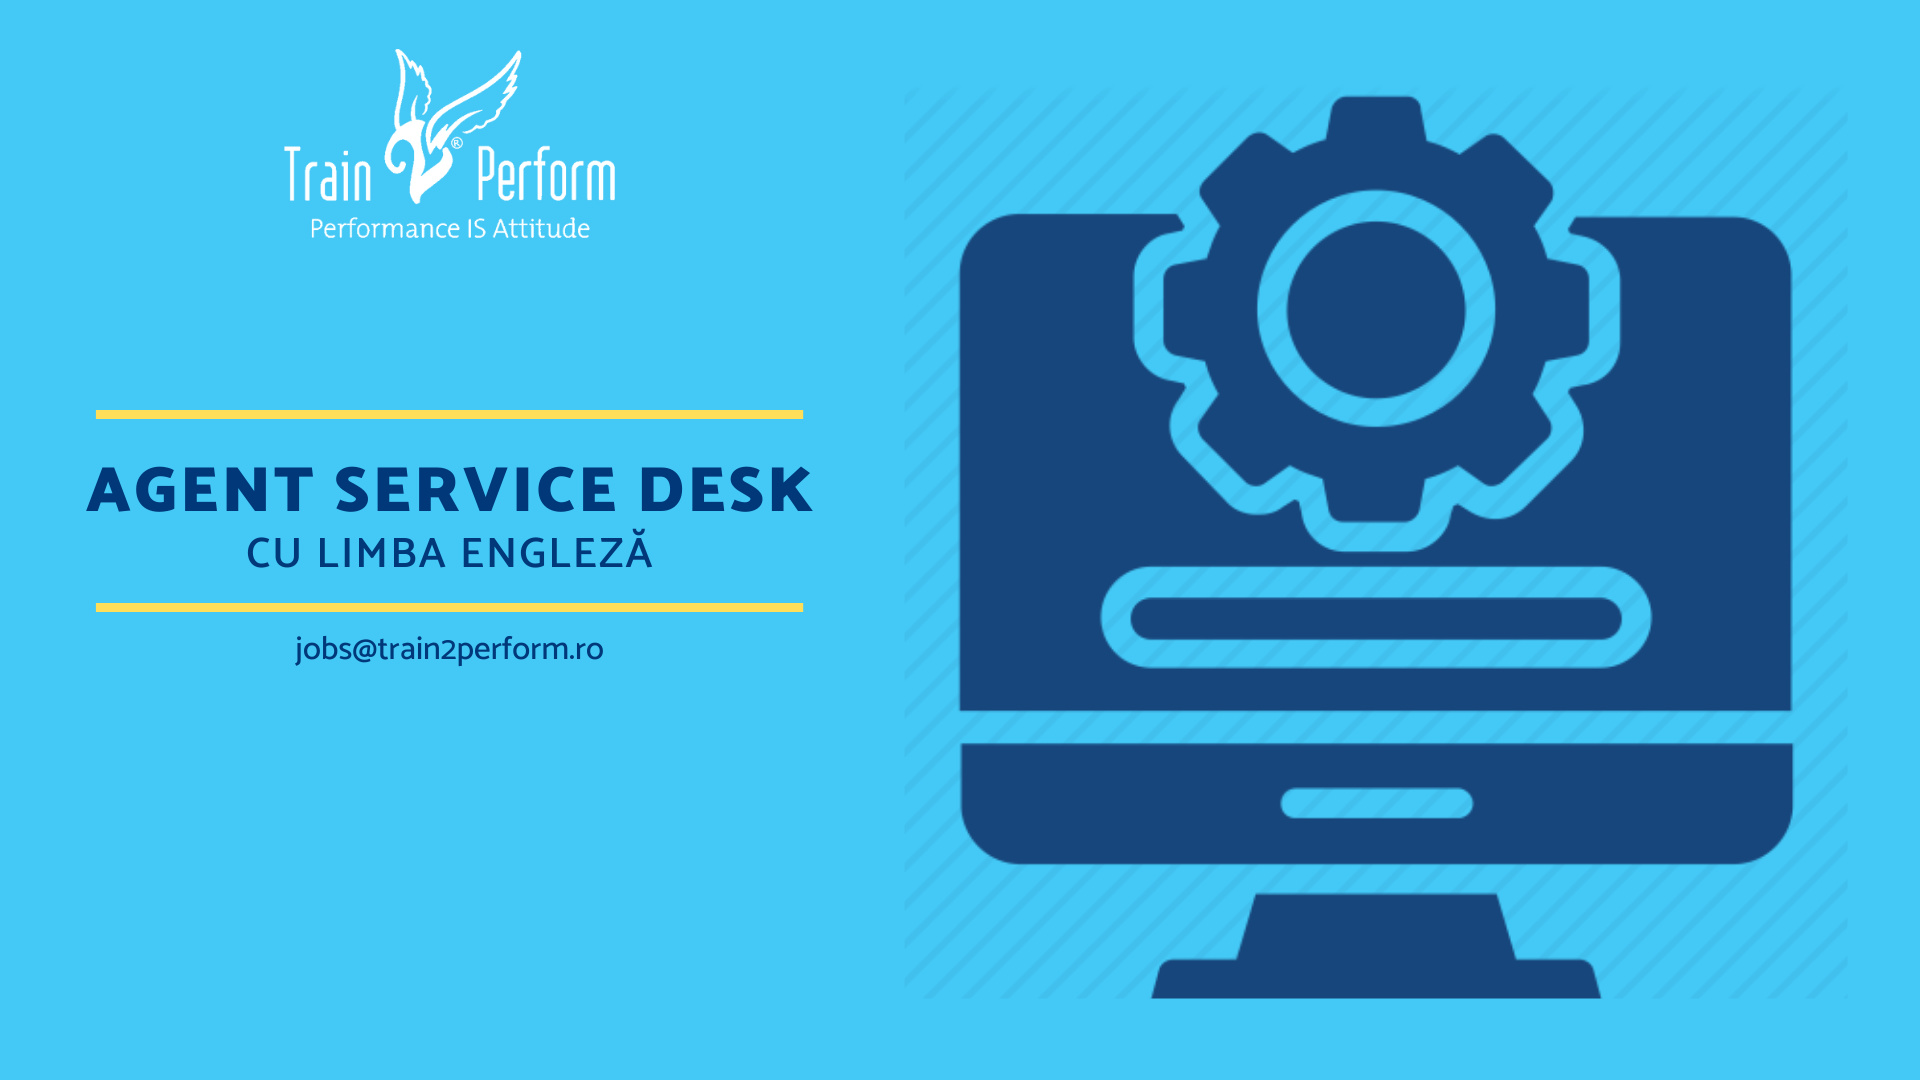 Service Desk Agent with English_Iasi